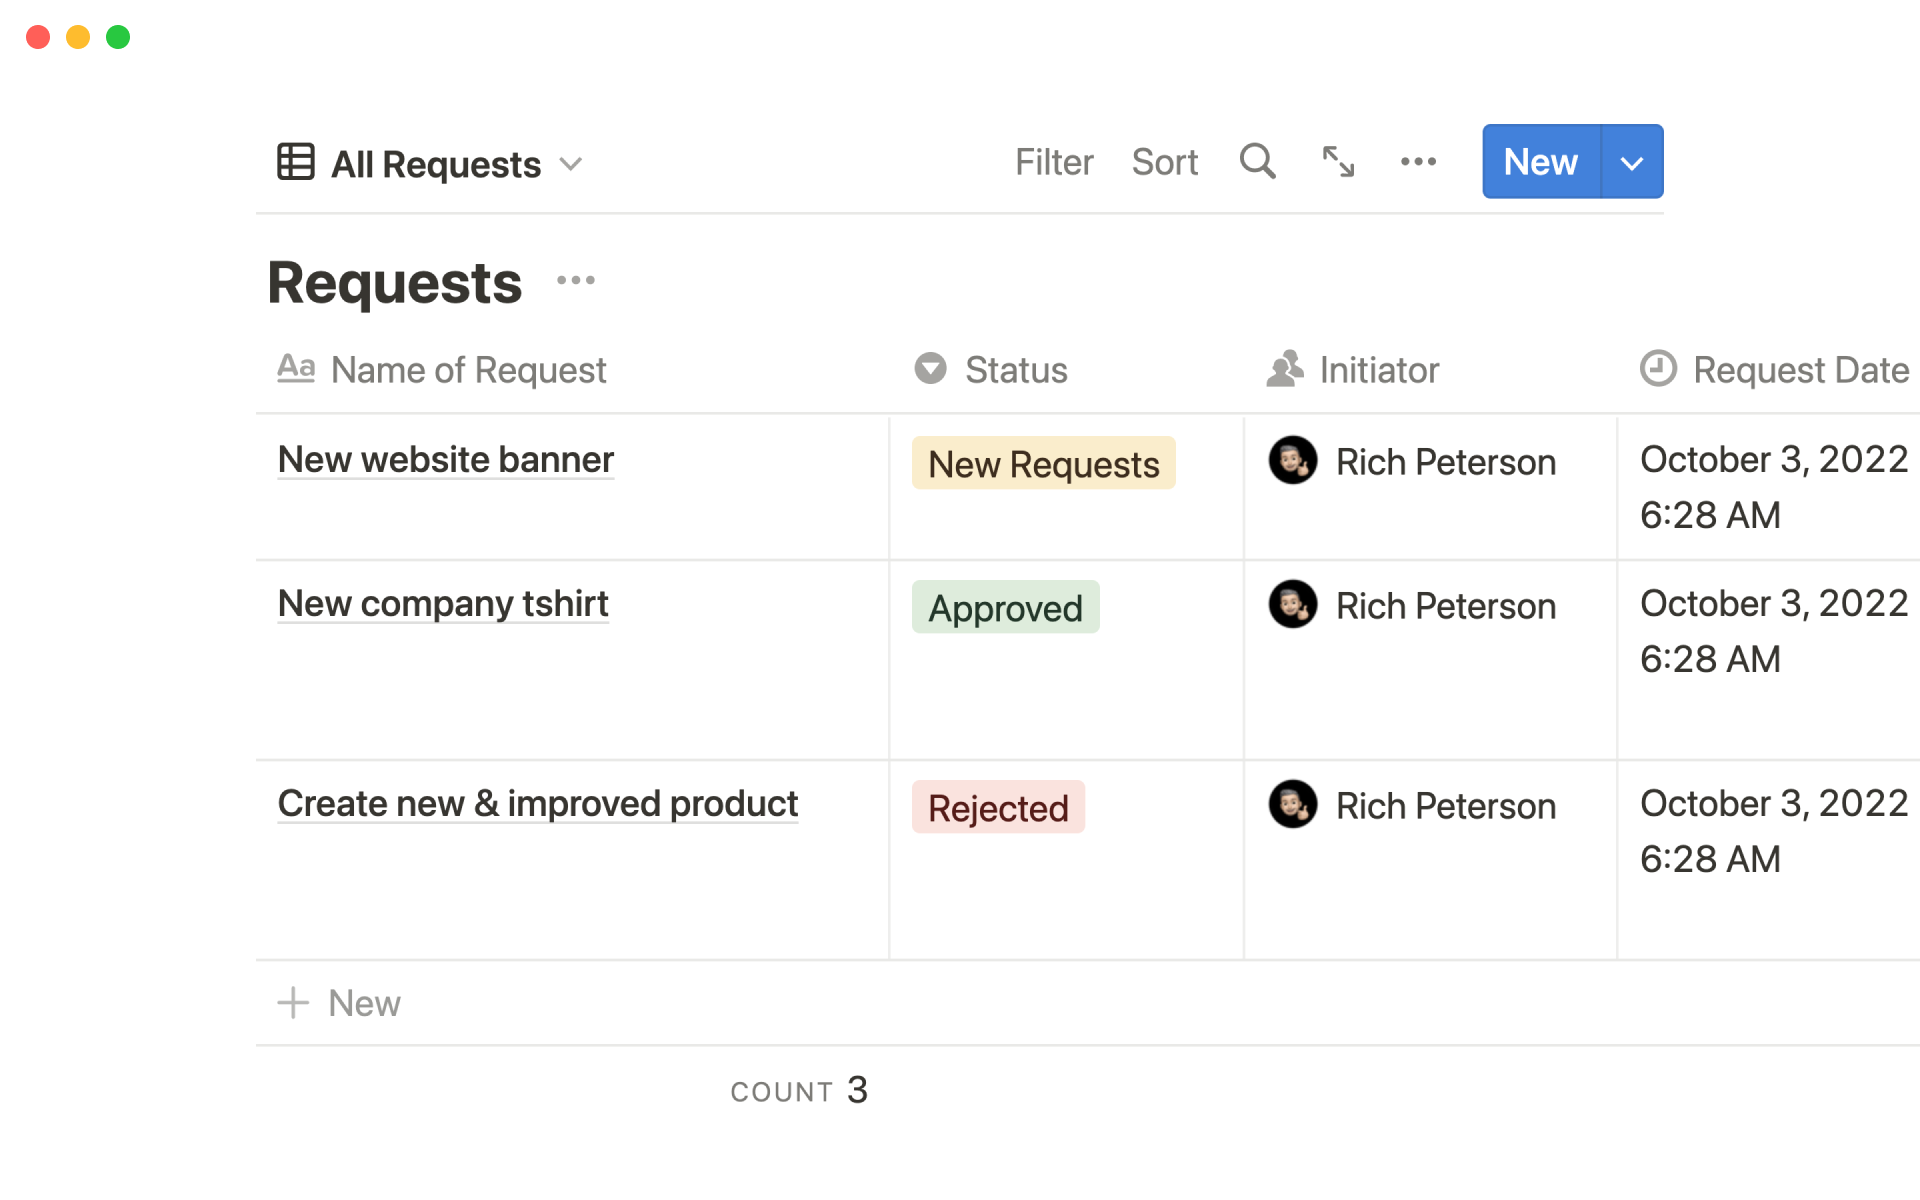 Manage all incoming project requests and approvals in one place.